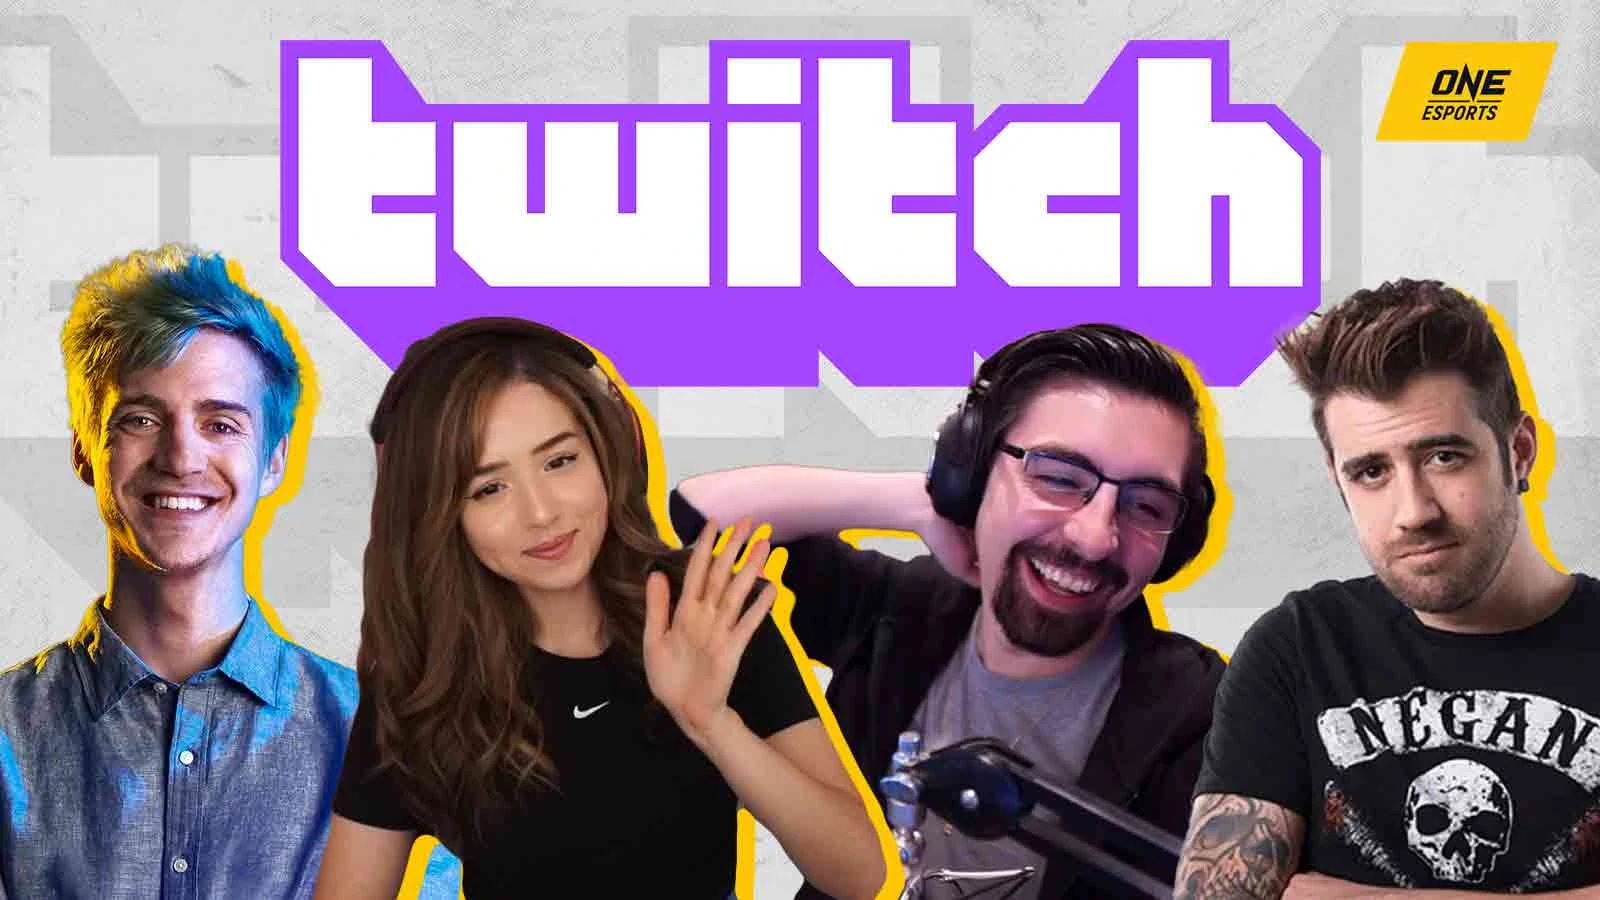 Twitch's new Guest Star mode will let anyone turn their stream